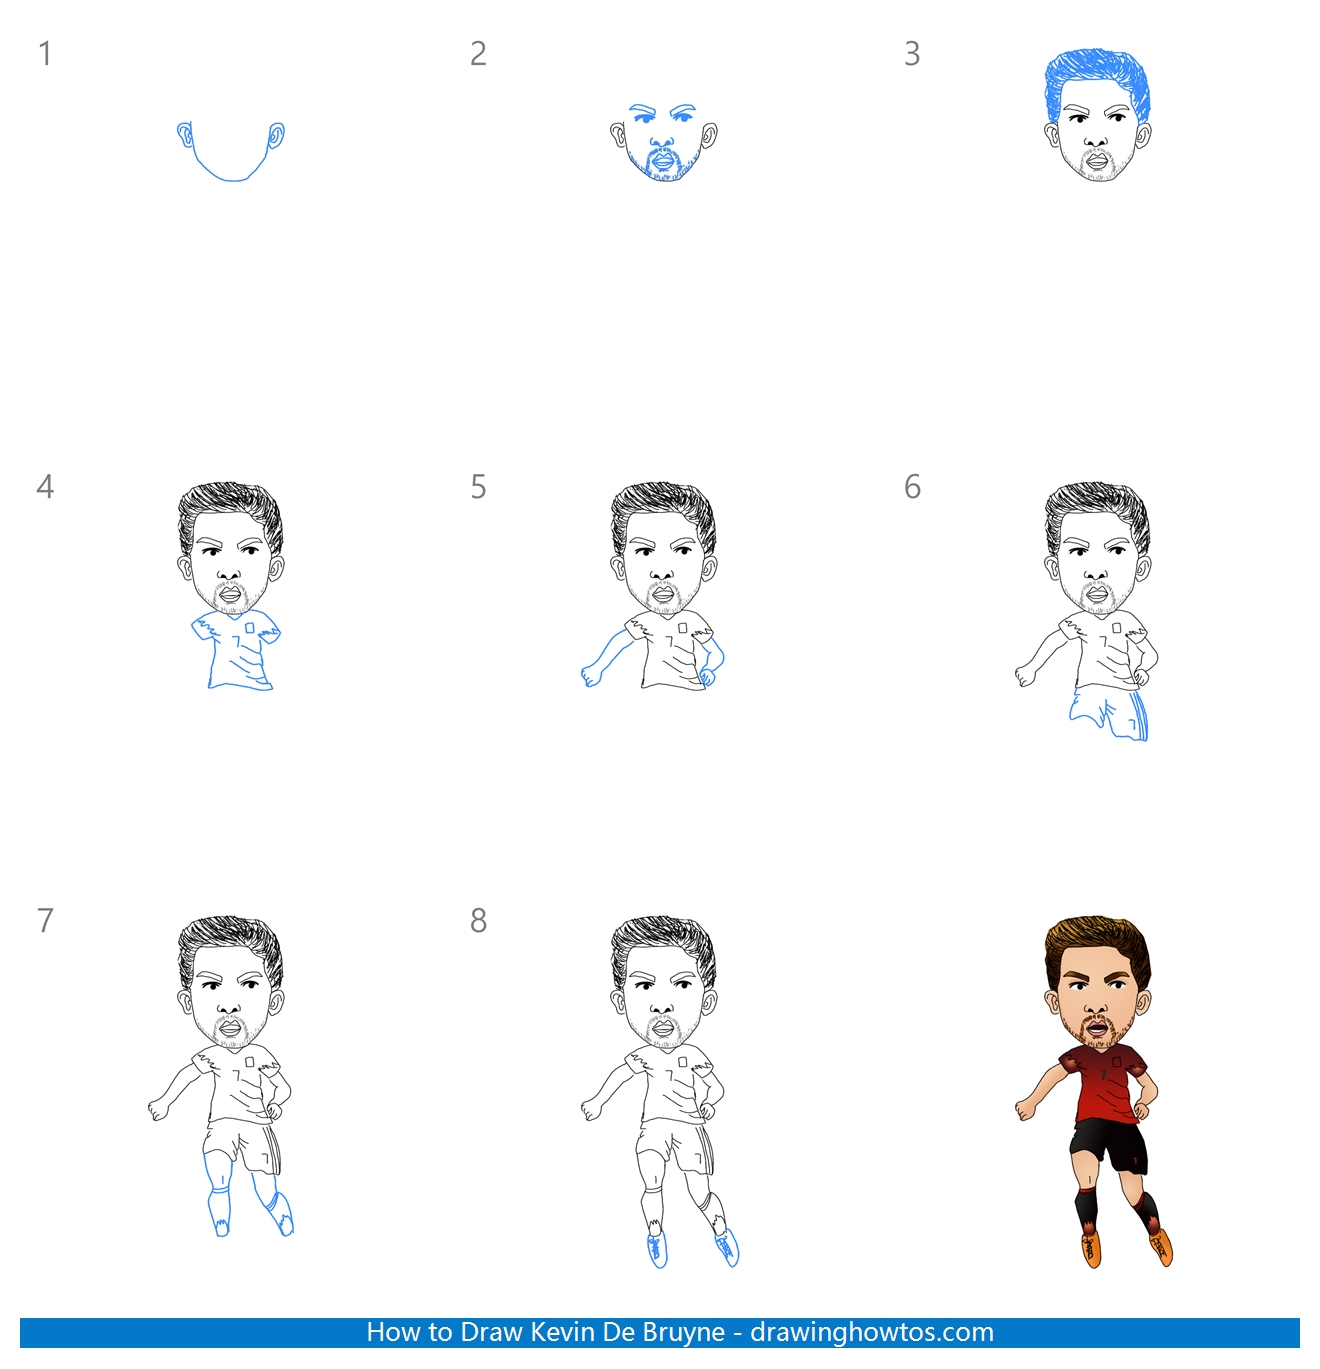 How to Draw Kevin De Bruyne Step by Step